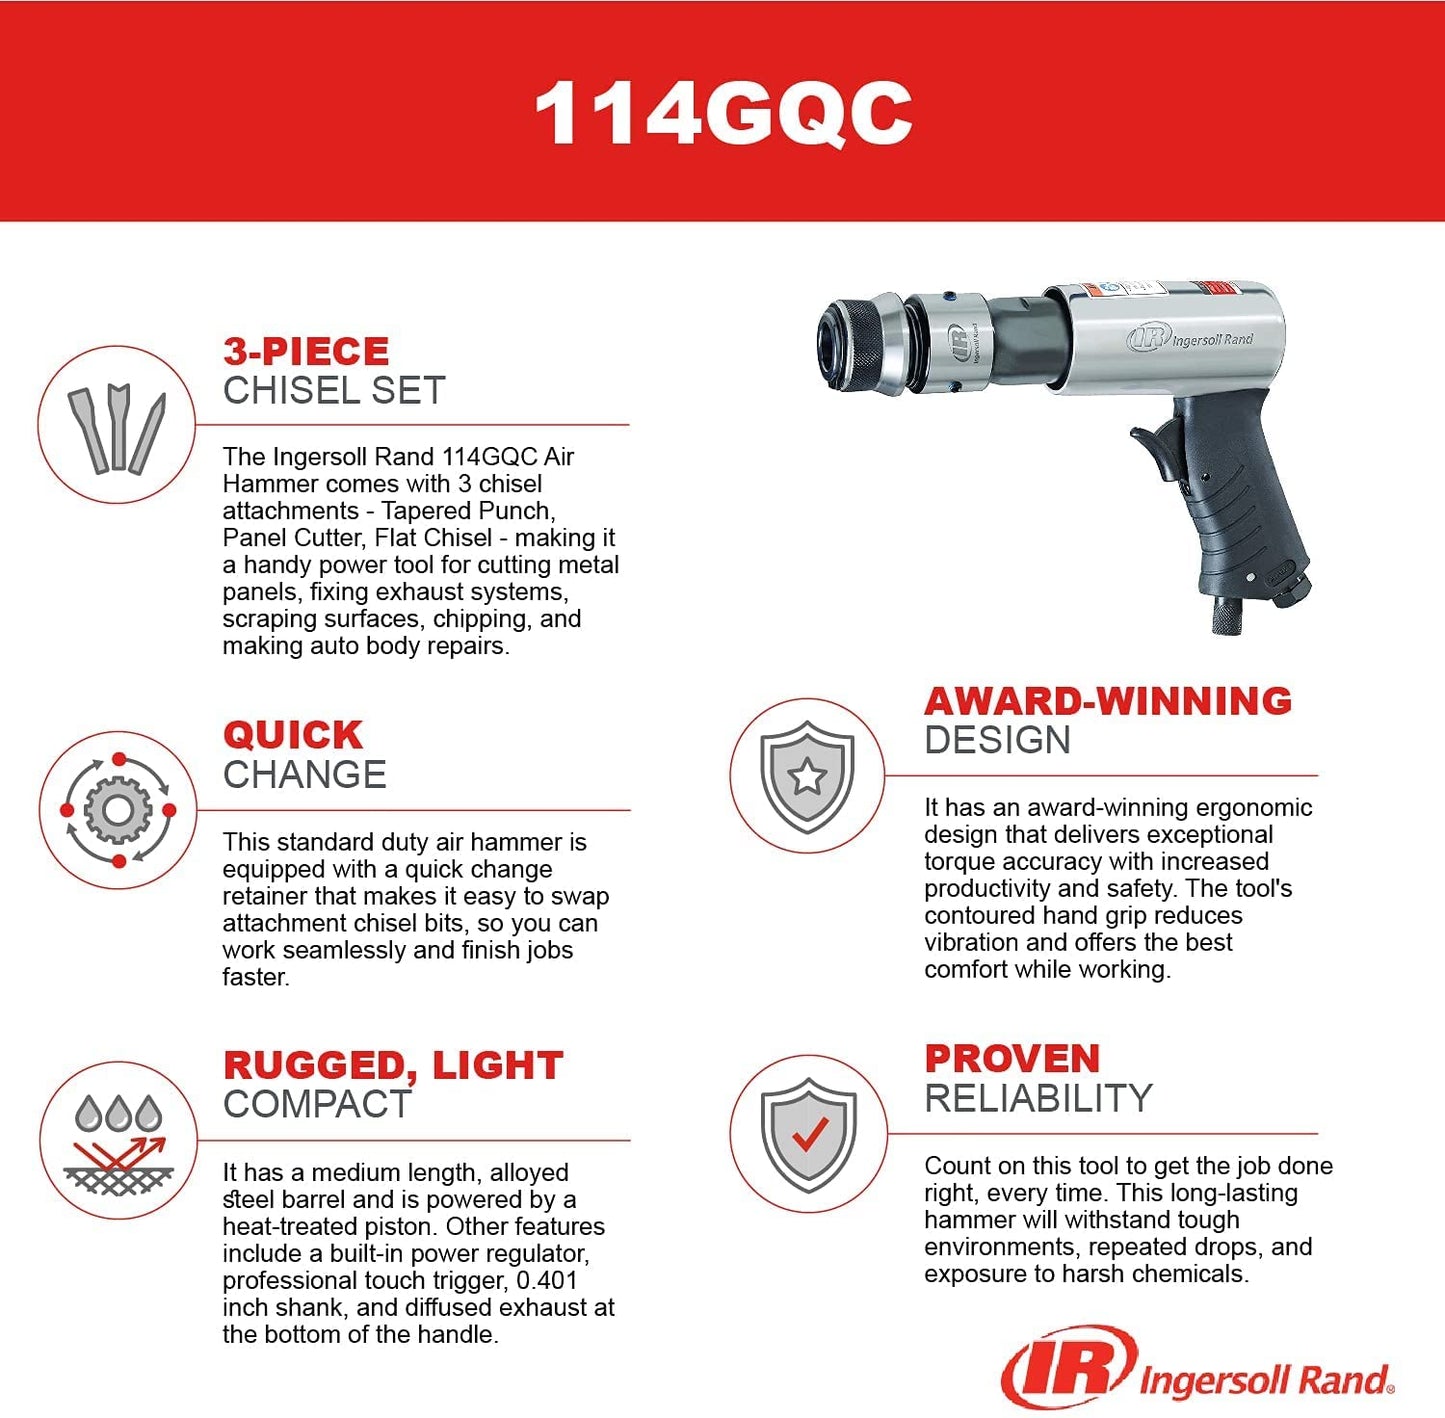 Ingersoll Rand 114GQC Air Hammer - 3 PC Chisel Set with Tapered Punch, Panel Cutter, Flat Chisel, 2-5/8 Inch stroke, 3500 BPM, Lightweight, Compact,